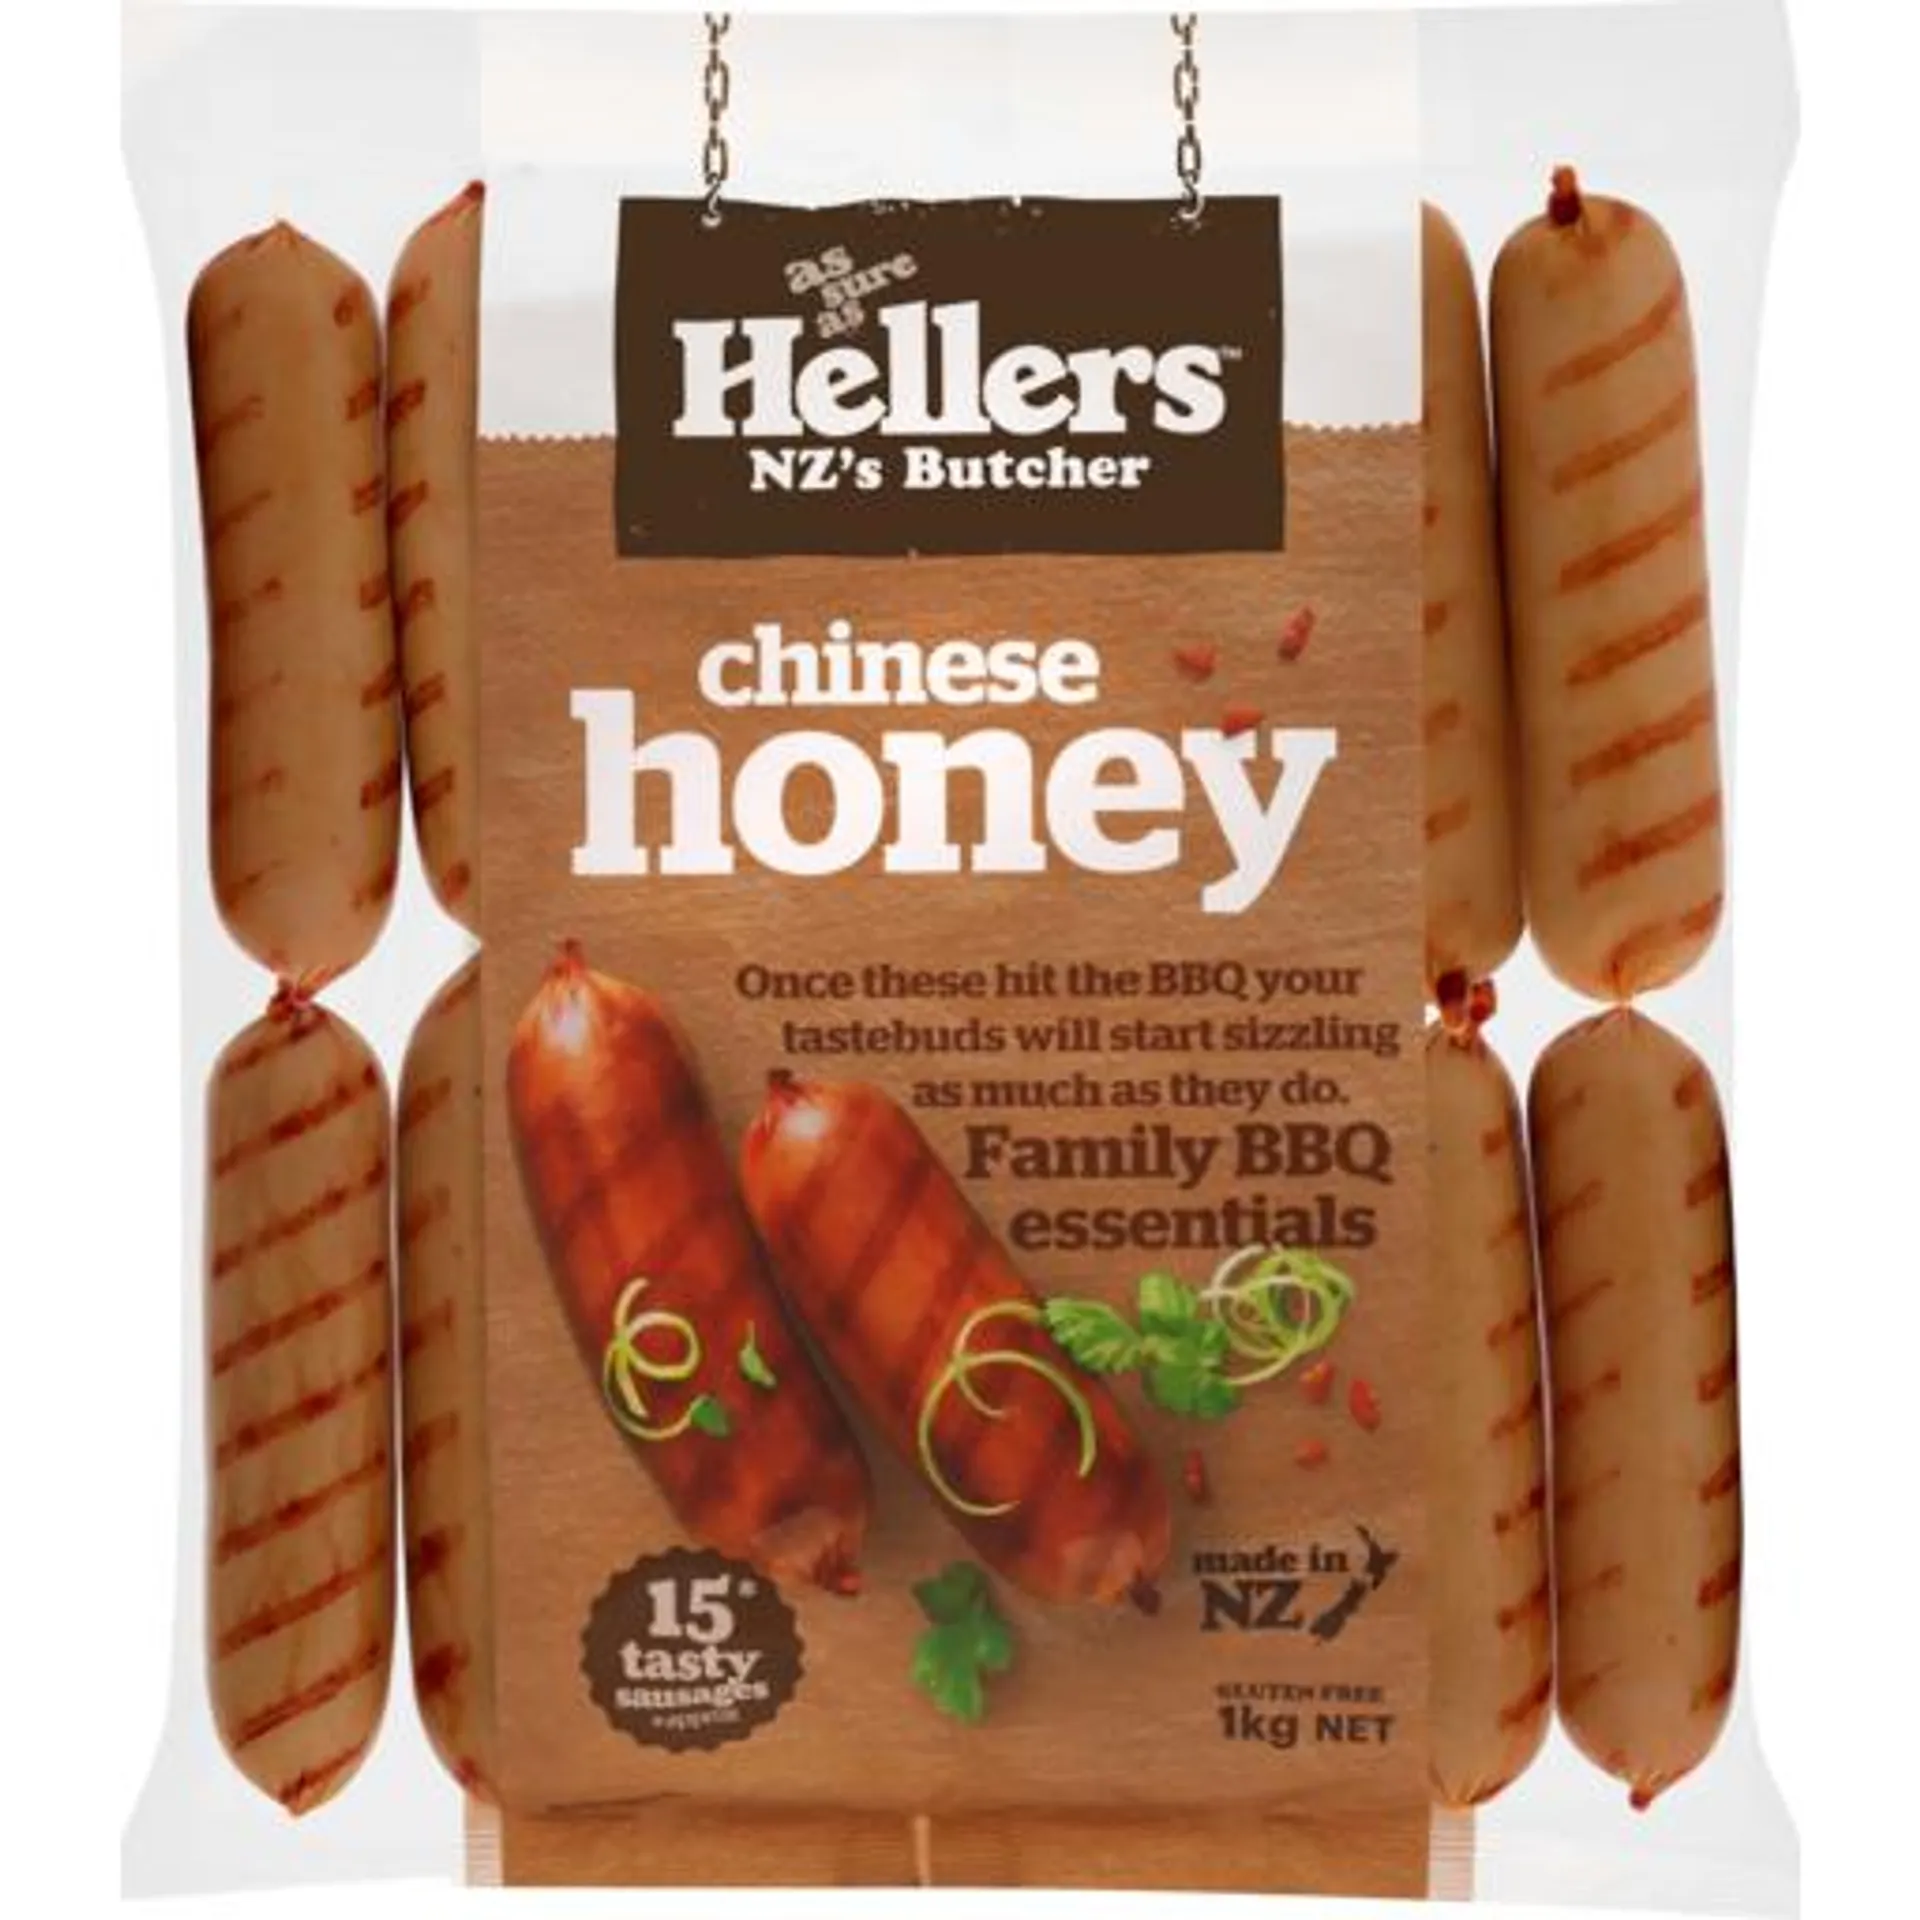 Hellers Sausages BBQ Chinese Honey 1kg